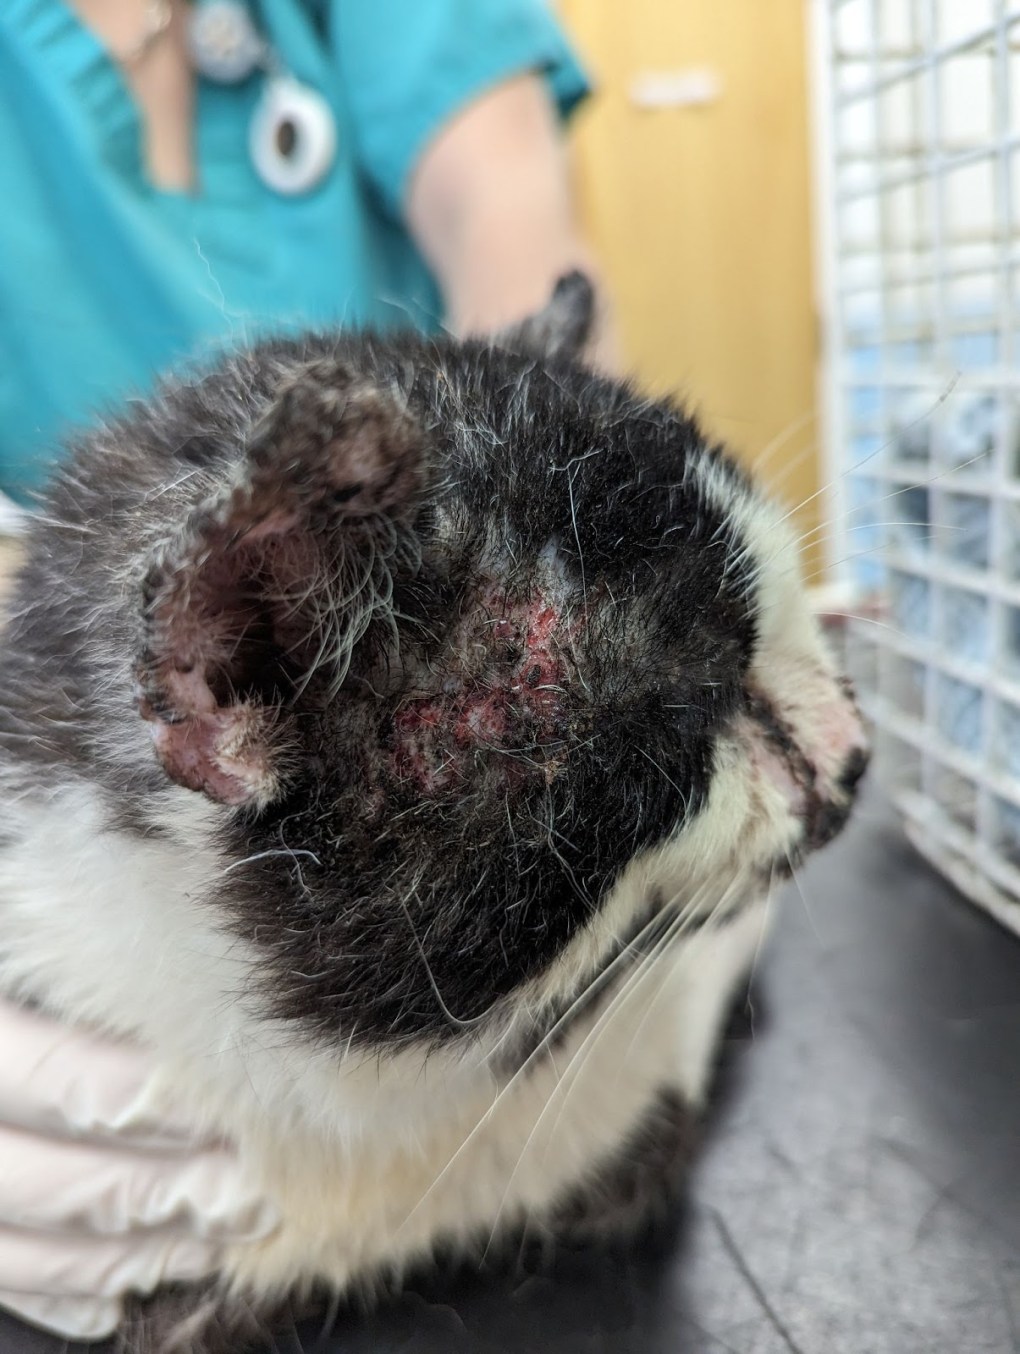 RSPCA Appeals for Information on Abandoned Tom Cat in Need of Lengthy Treatment